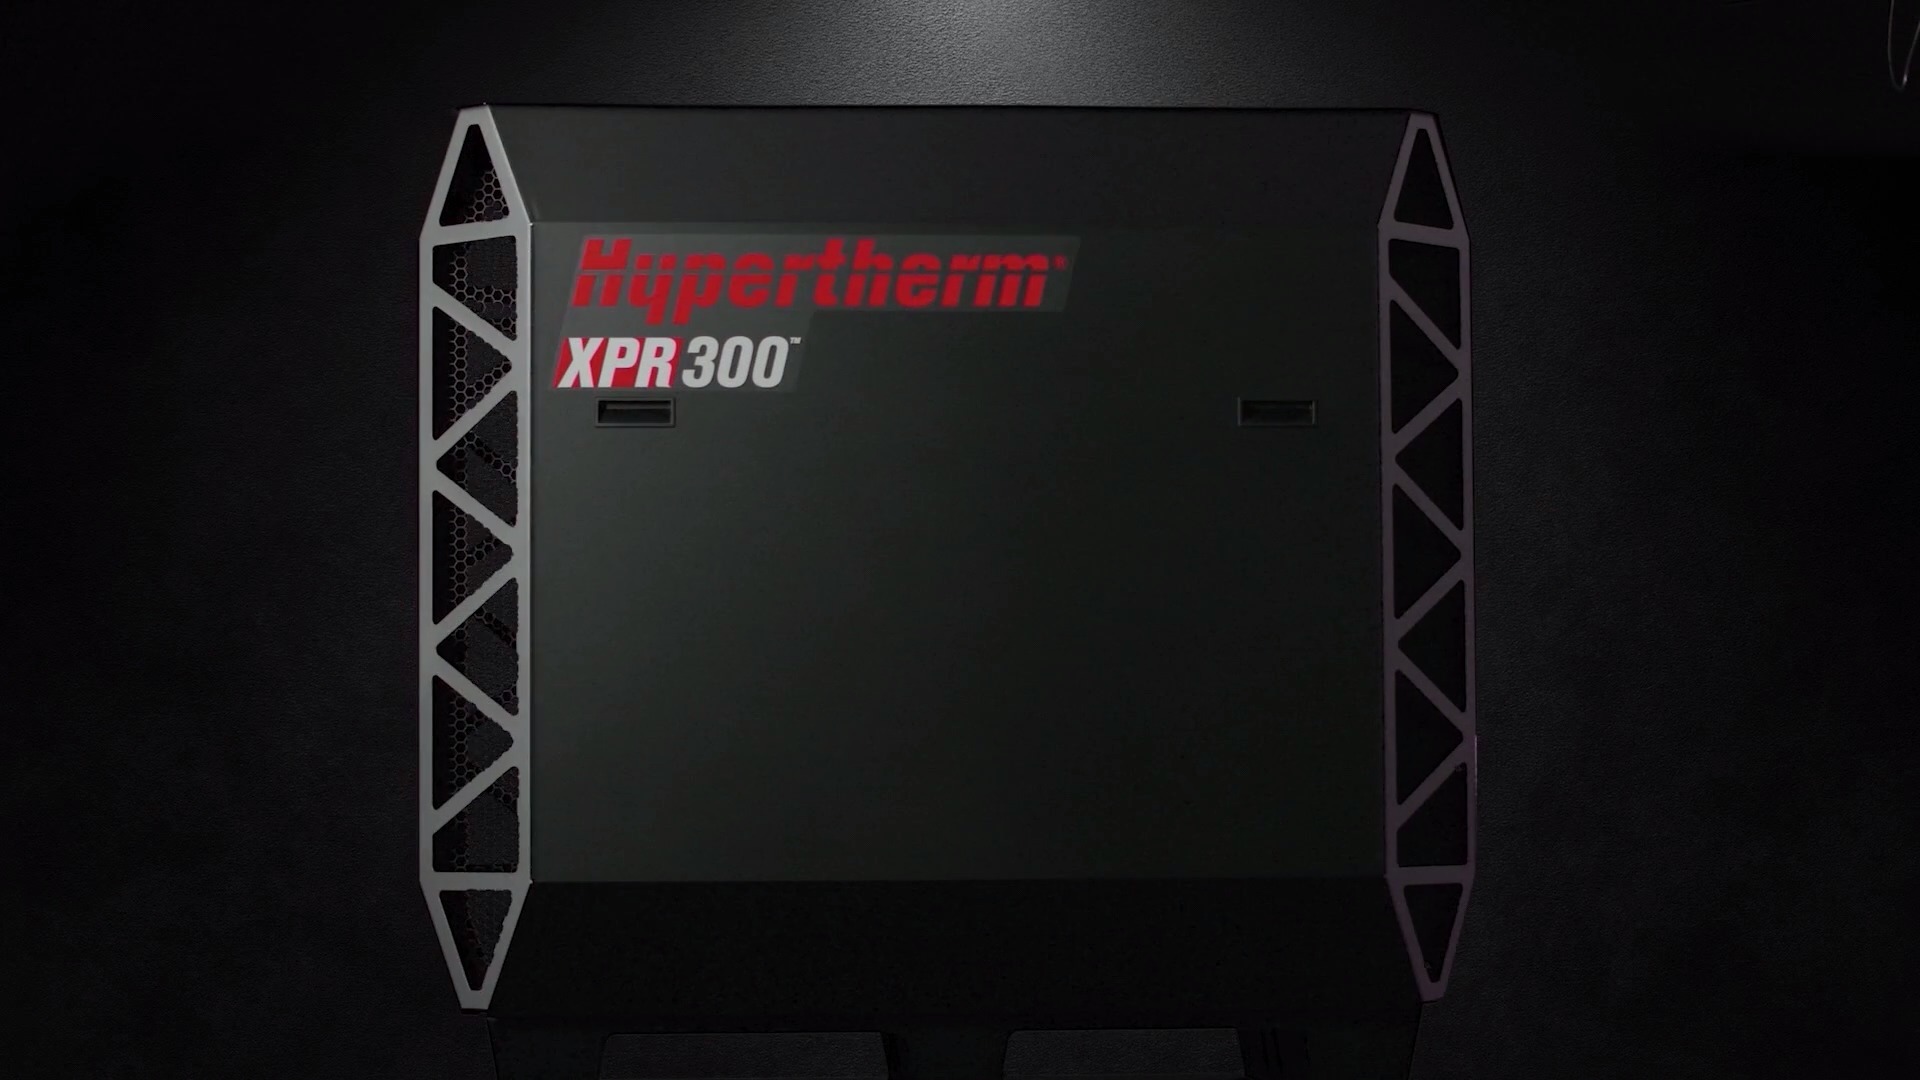 XPR300 overview